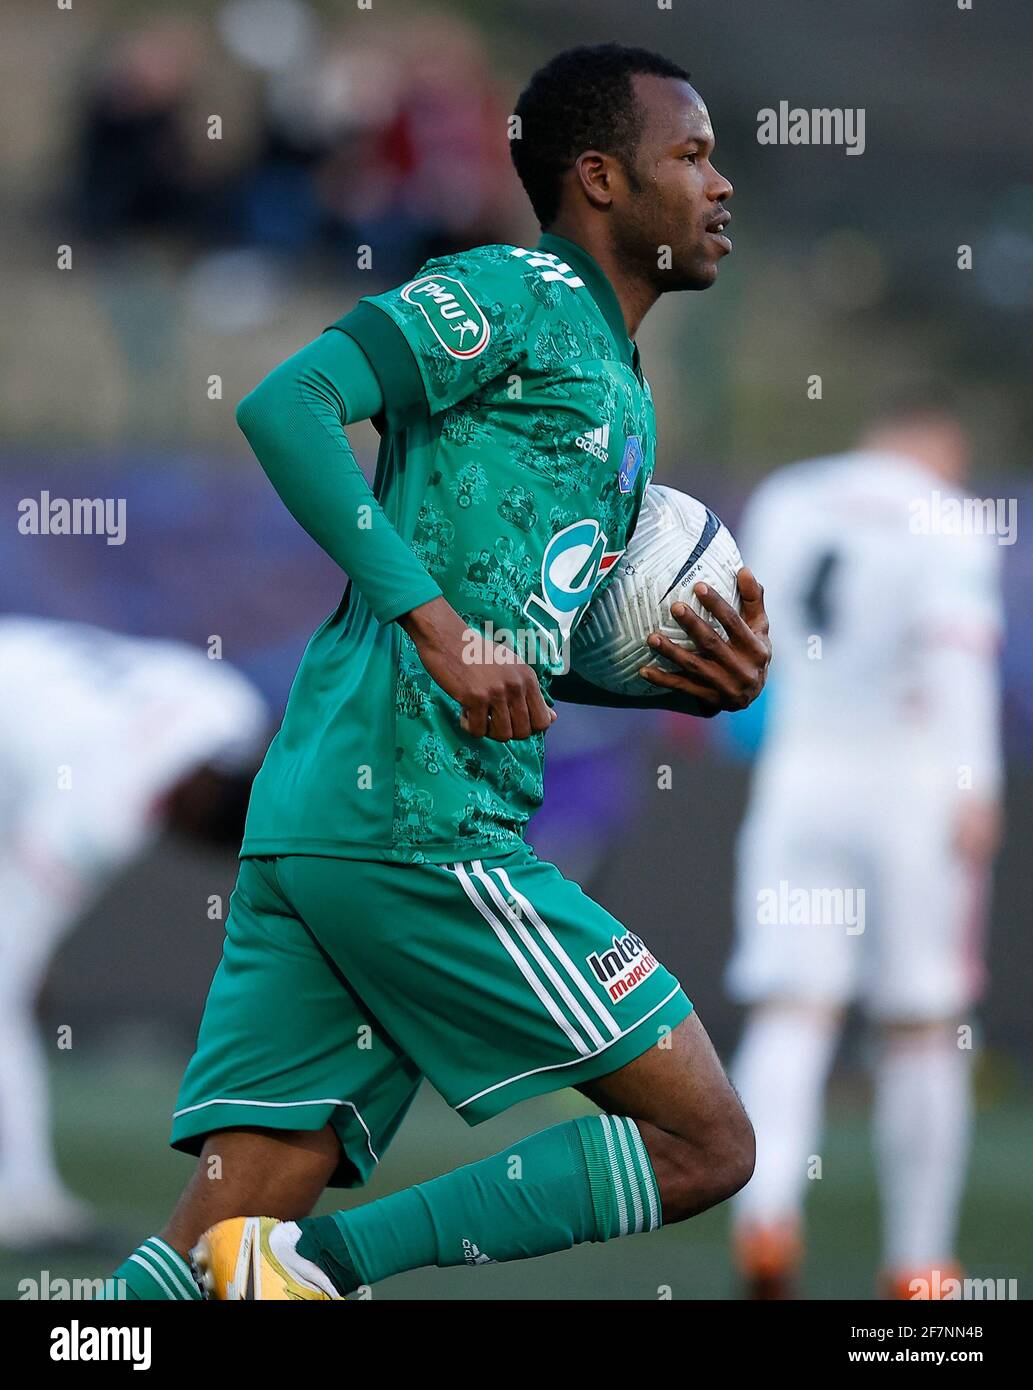 BA Pape Meissa from REDSTAR celebrate his goal during the match between the REDSTAR and OLYMPIQUE LYONNAIS, at BAUER stadium on April 08, 2021 in Saint-Ouen, France. Photo by Loic BARATOUX/ABACAPRESS.COM Stock Photo